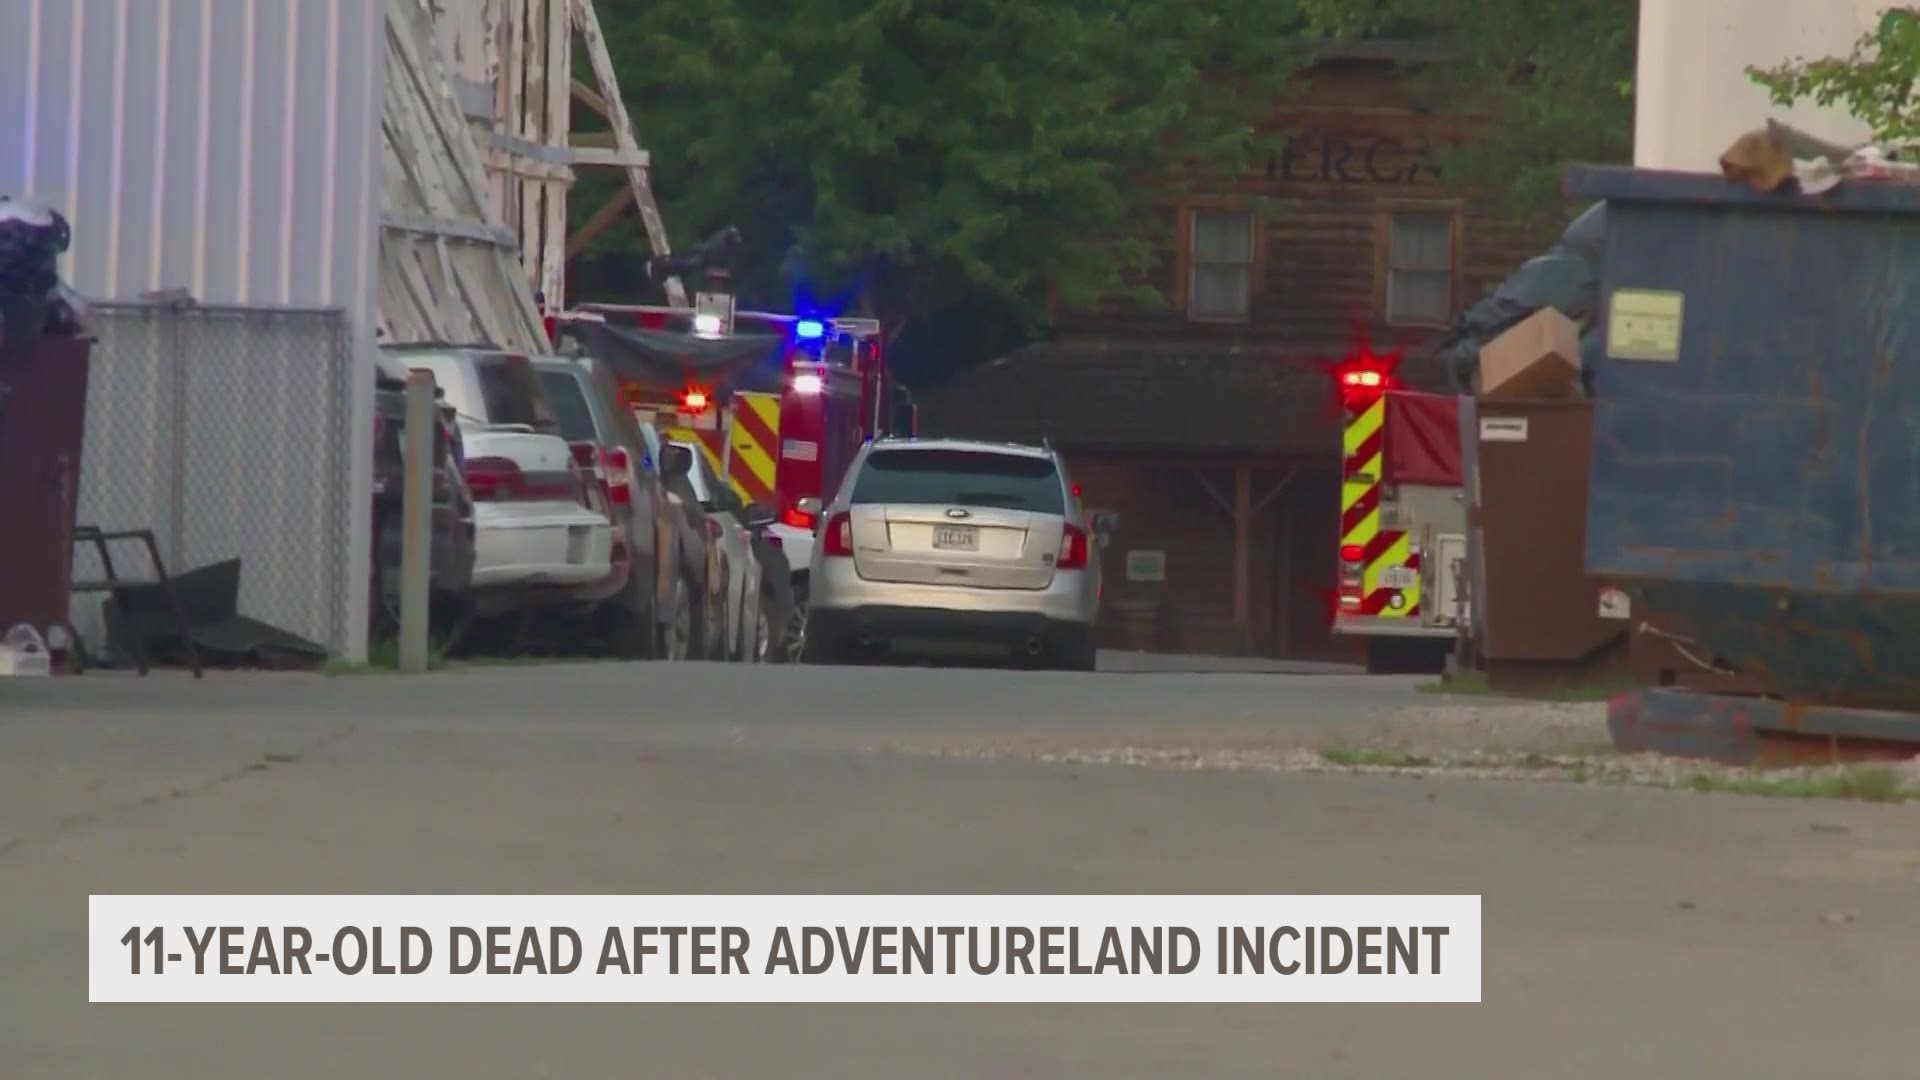 Adventureland issued a statement Sunday evening saying one guest died in Saturday's accident after a boat overturned on the popular ride.